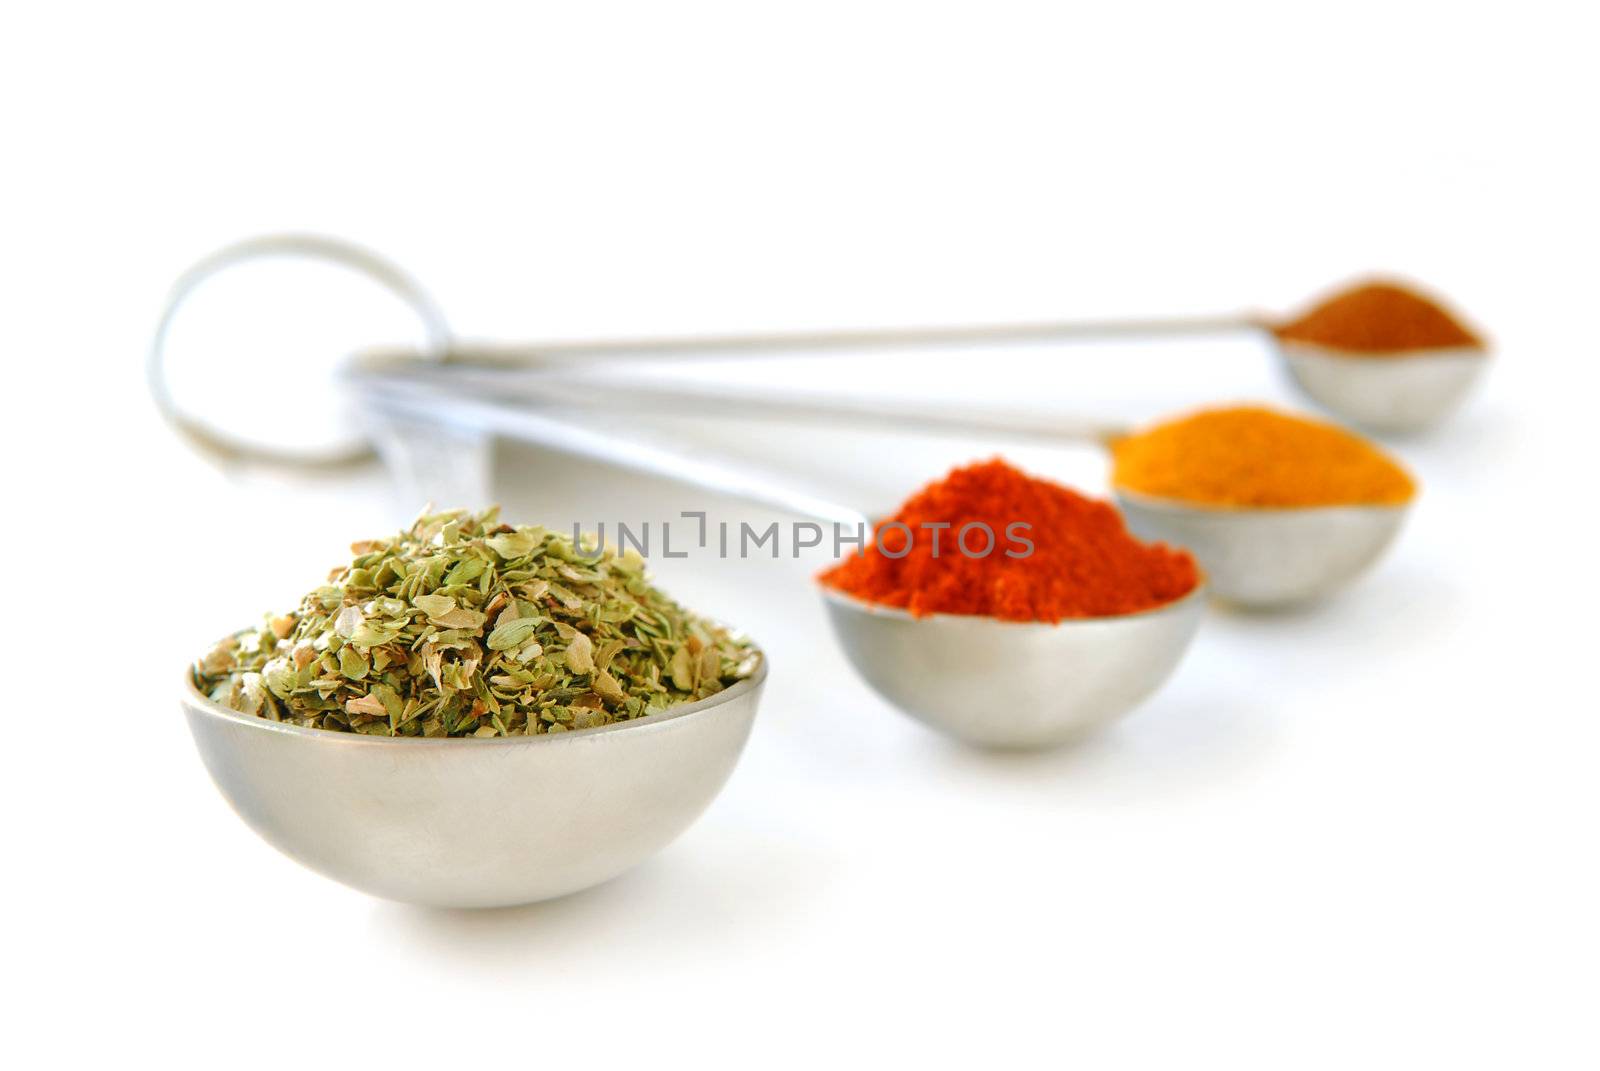 Spices in measuring spoons by elenathewise